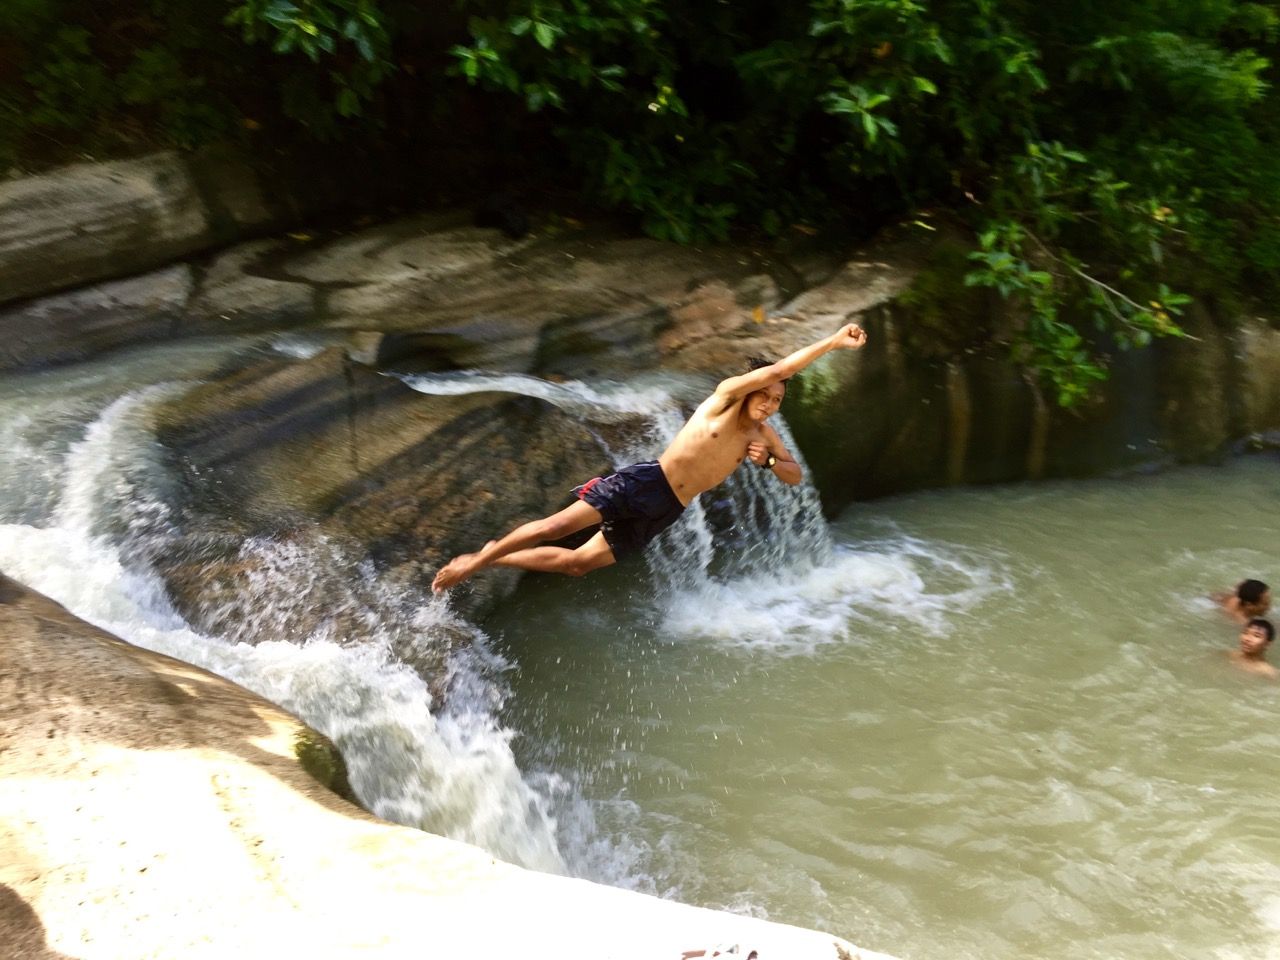 Boy jumping off a rock and posing.